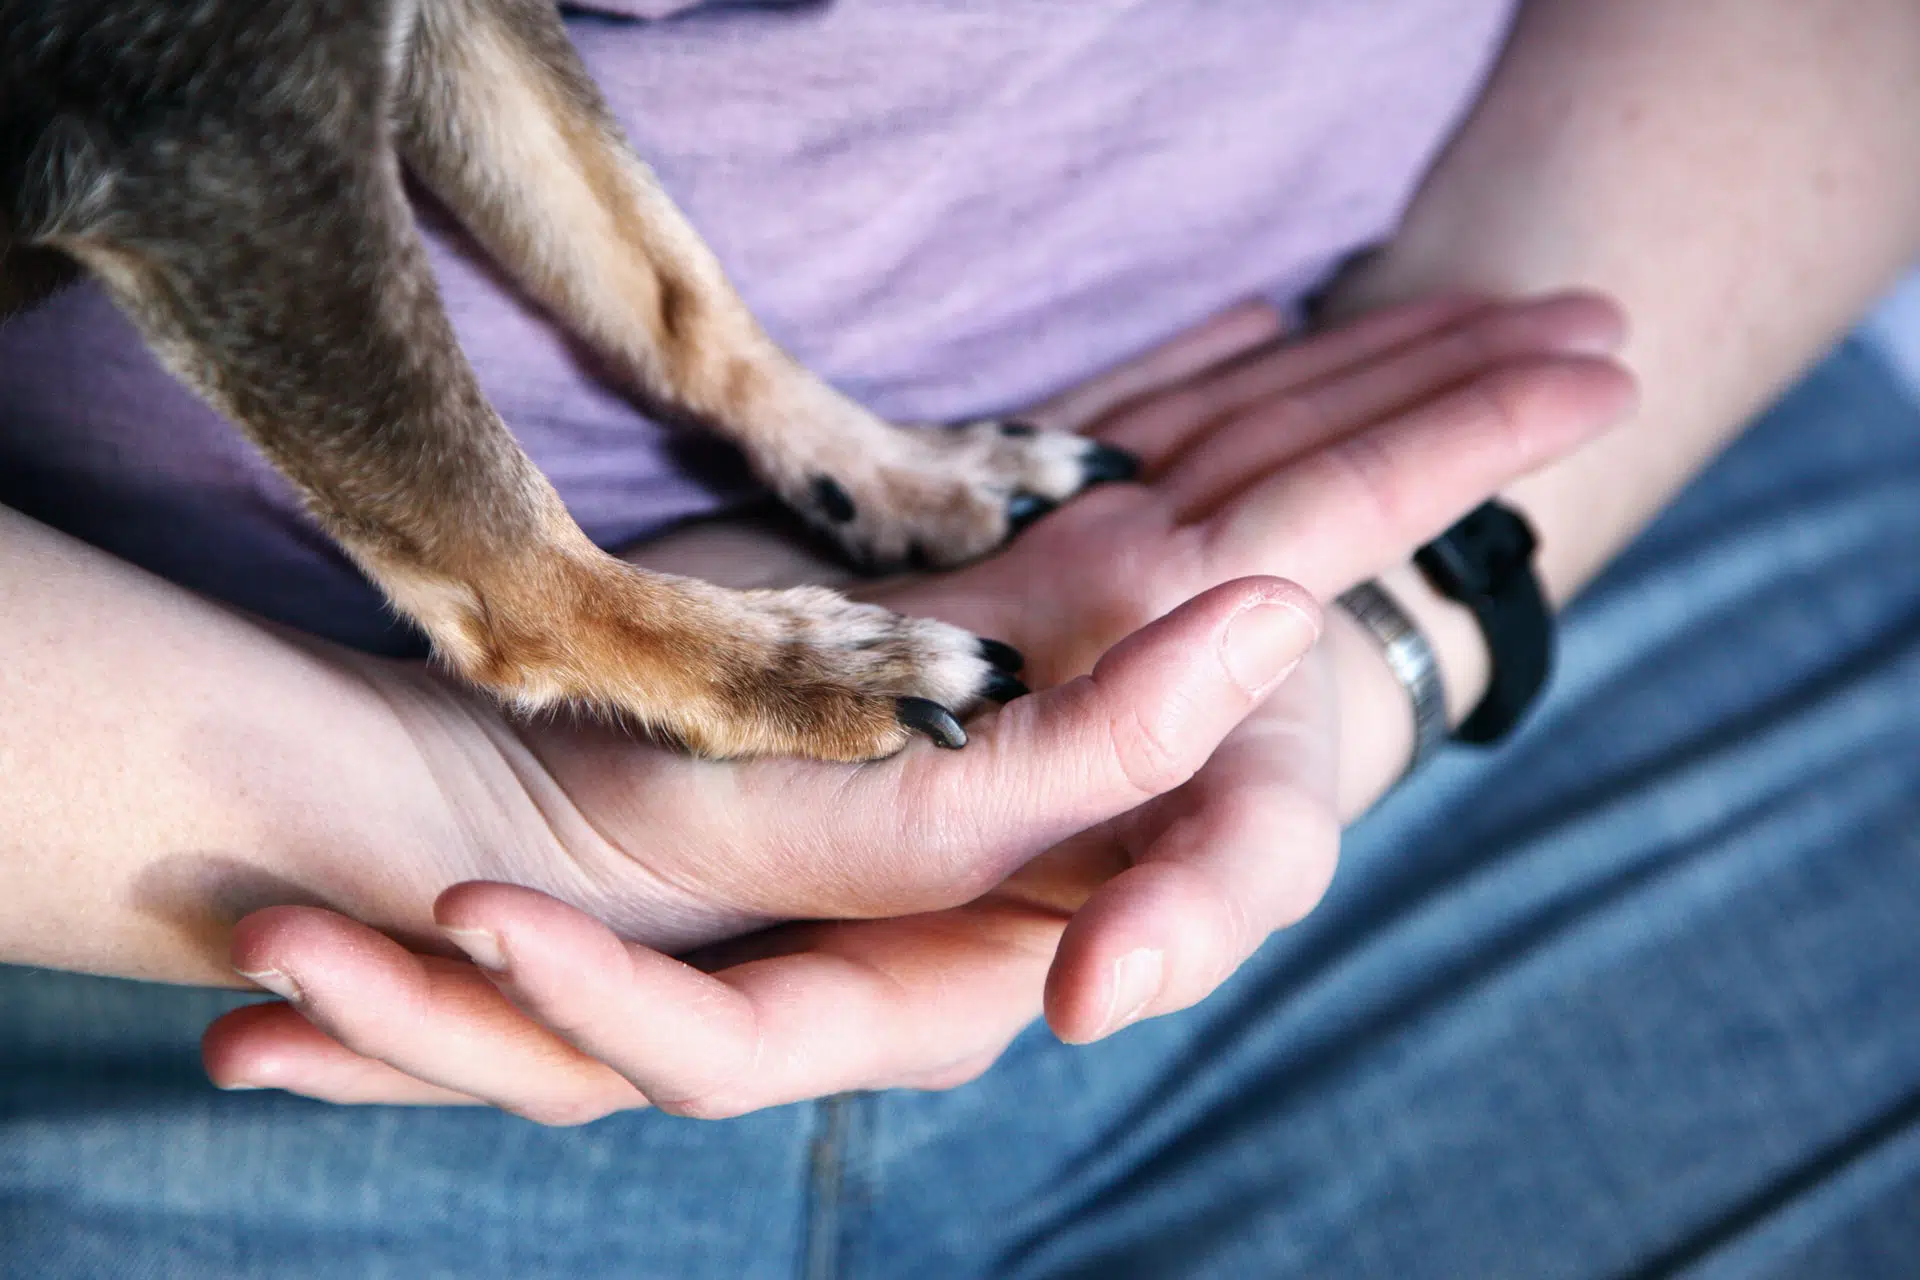 An old dog standing on its front paws on its owners hands